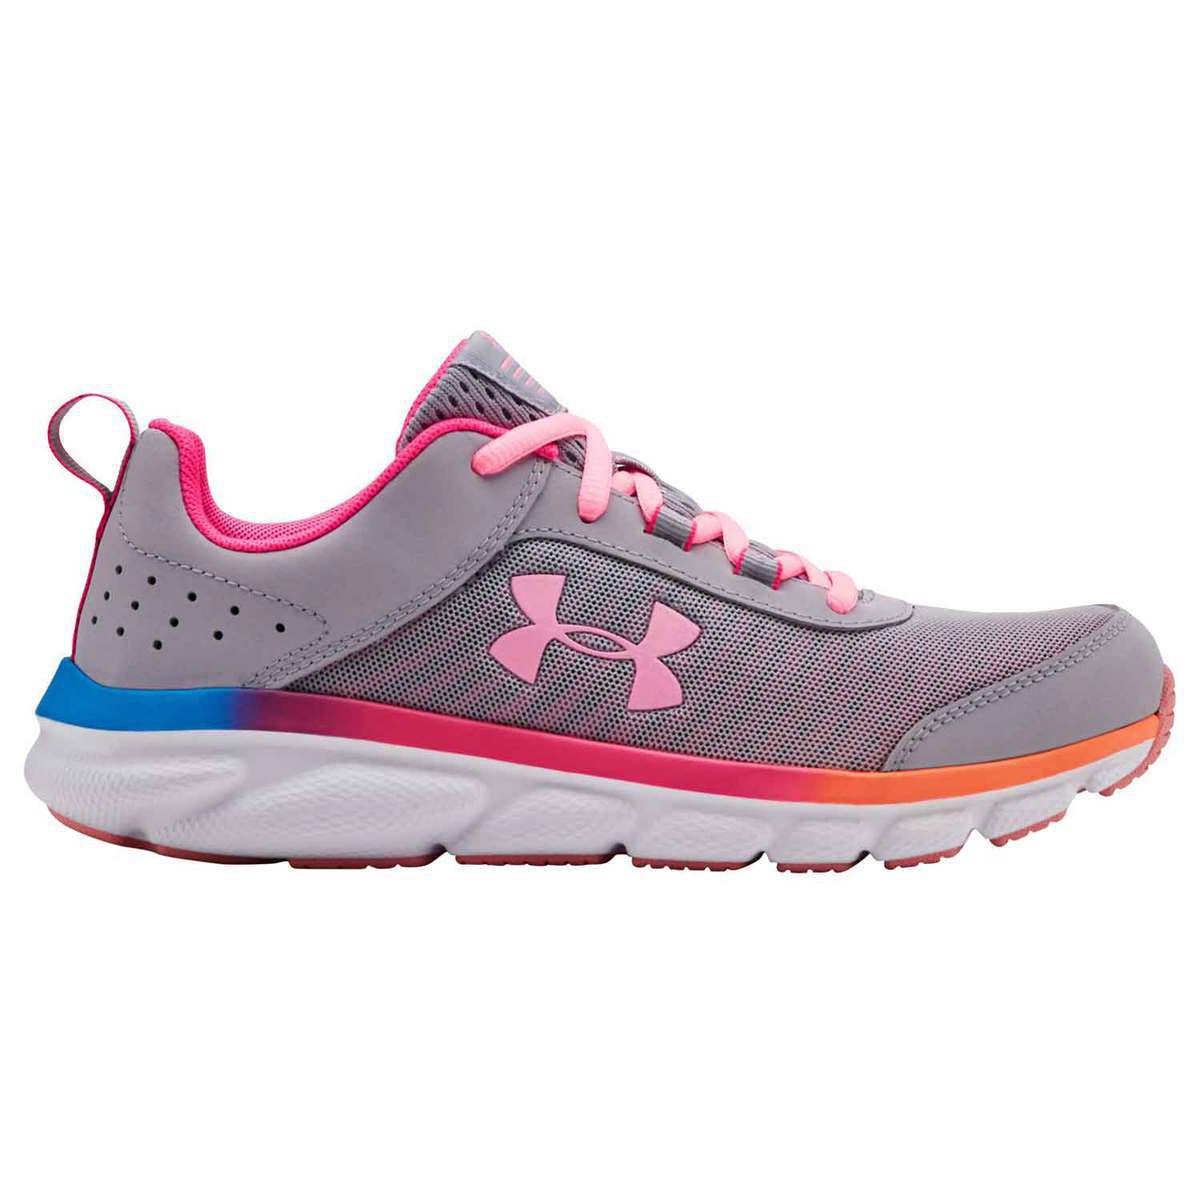 grens woensdag Sada Under Armour Youth Assert 8 Running Shoes - Ash Gray - Size 6 - Ash Gray 6  | Sportsman's Warehouse